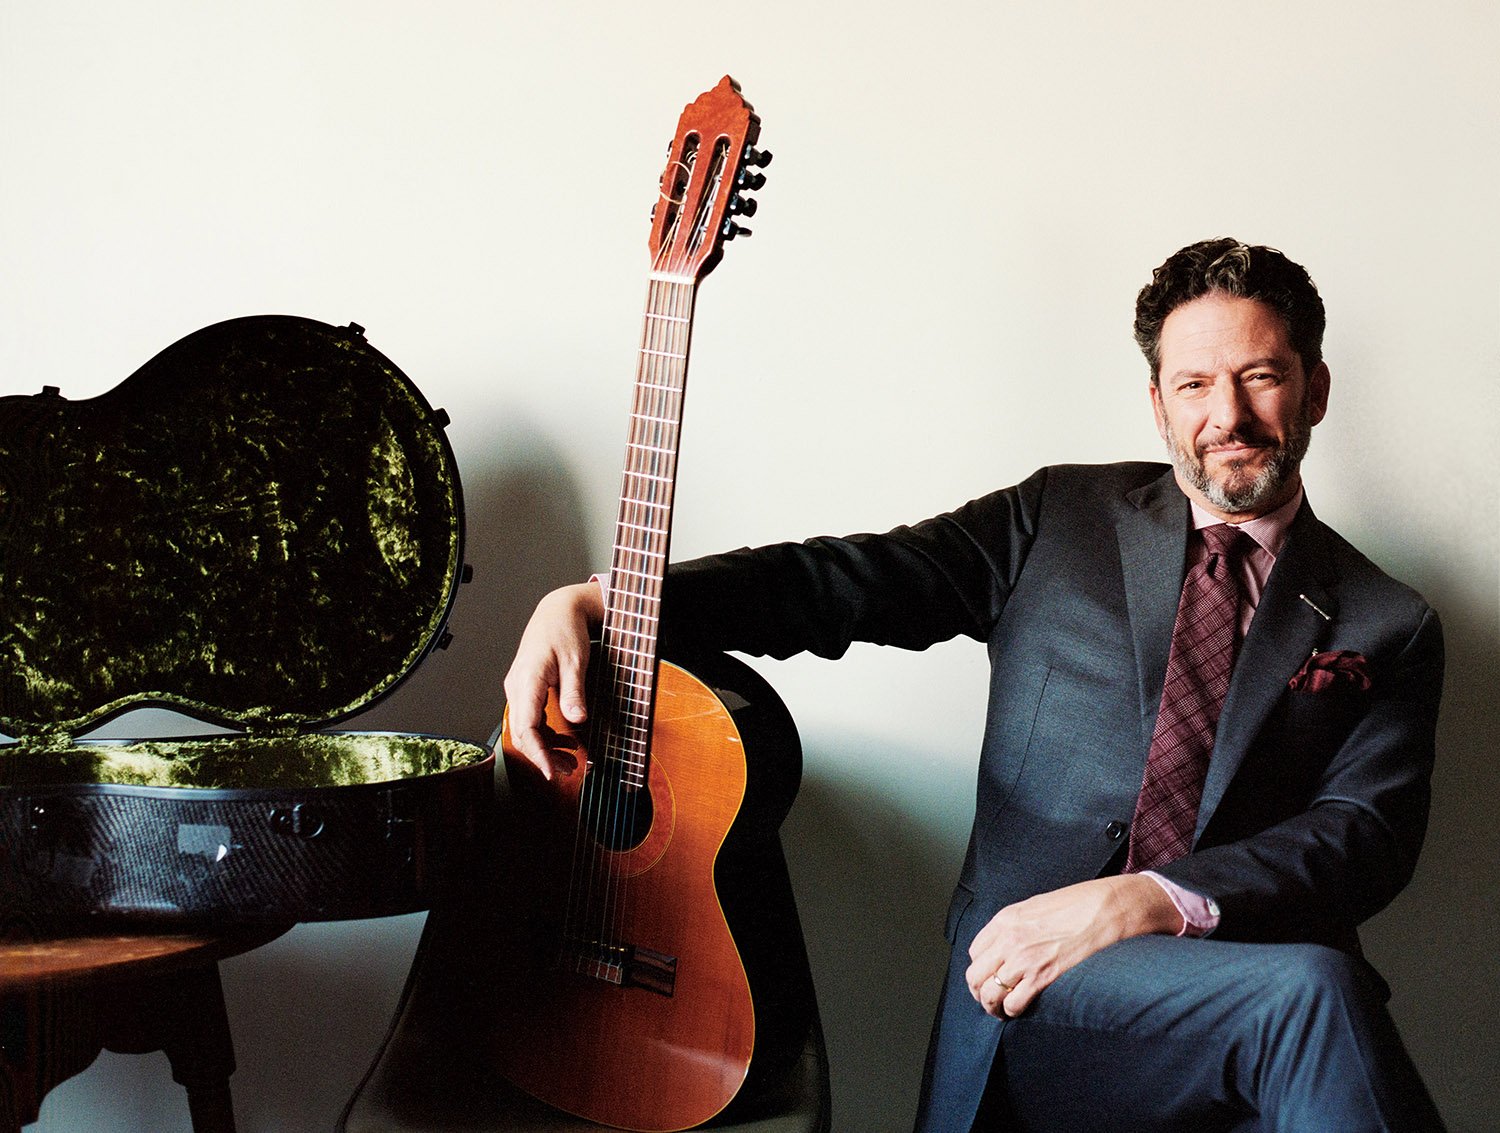 John Pizzarelli seated in a blue suit, right arm outstretched around his guitar, positioned upright, posed next to a rugged, open guitar case.